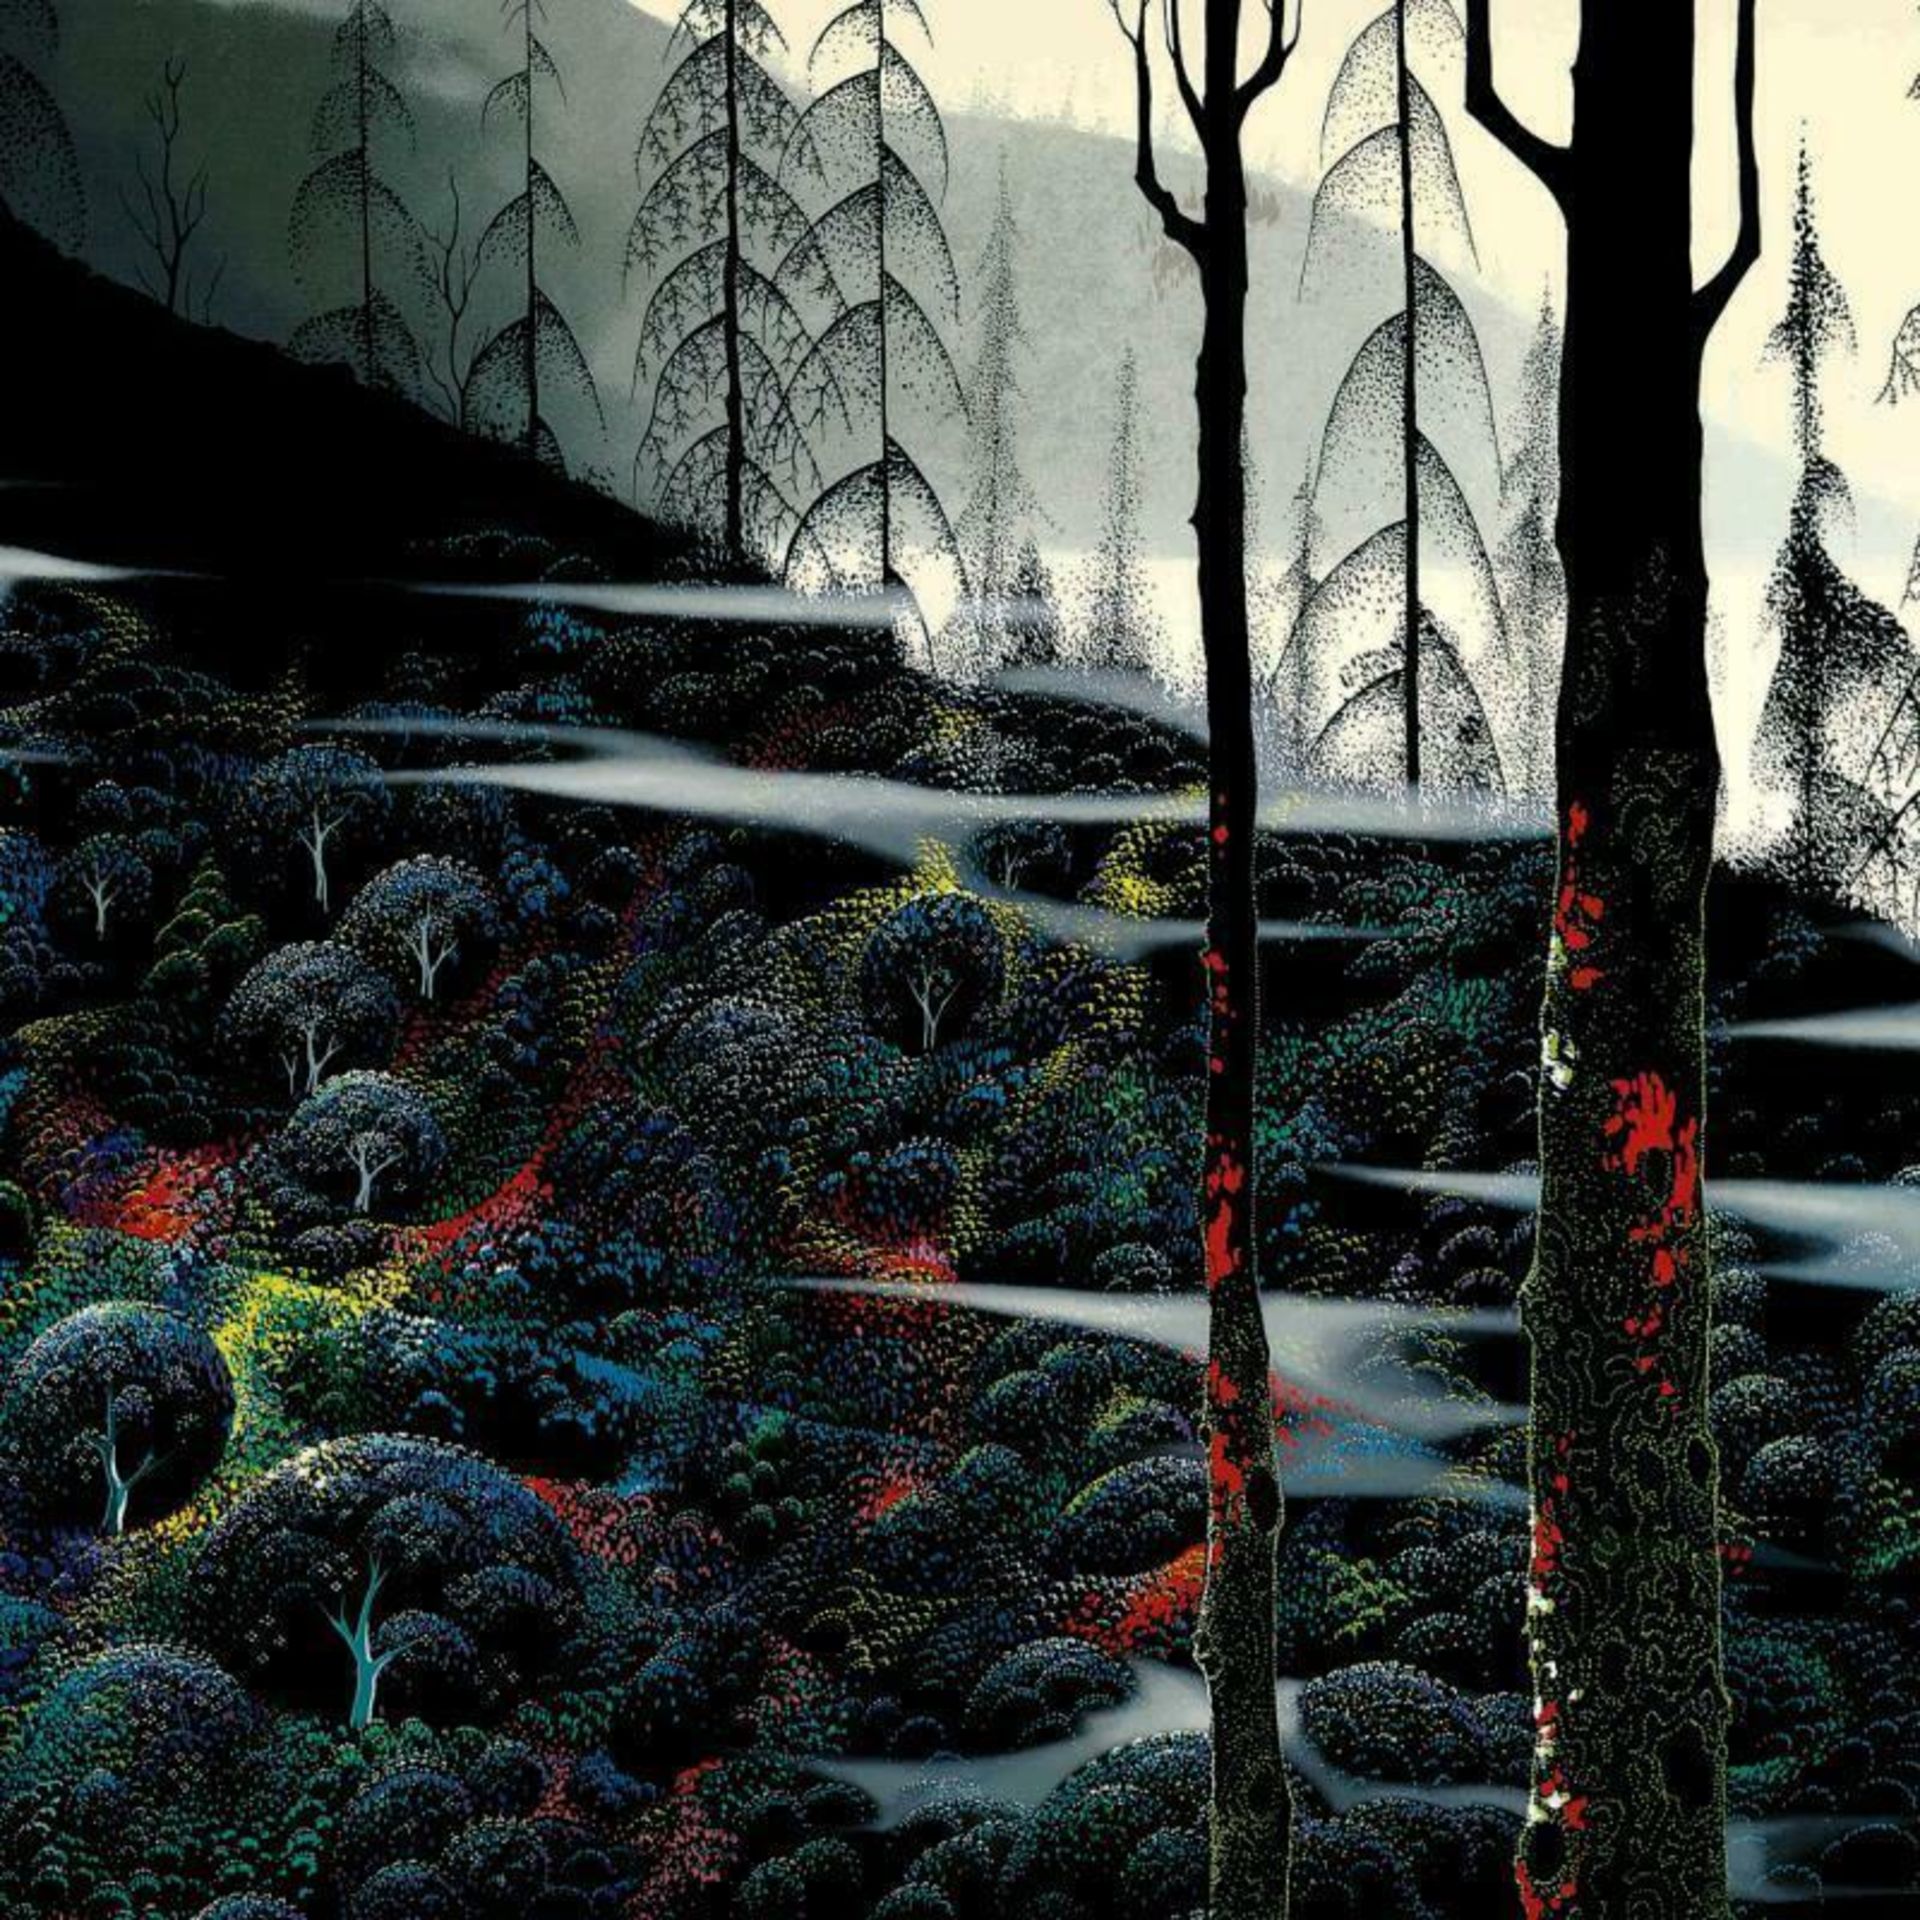 Dawns First Light by Eyvind Earle (1916-2000) - Image 2 of 2